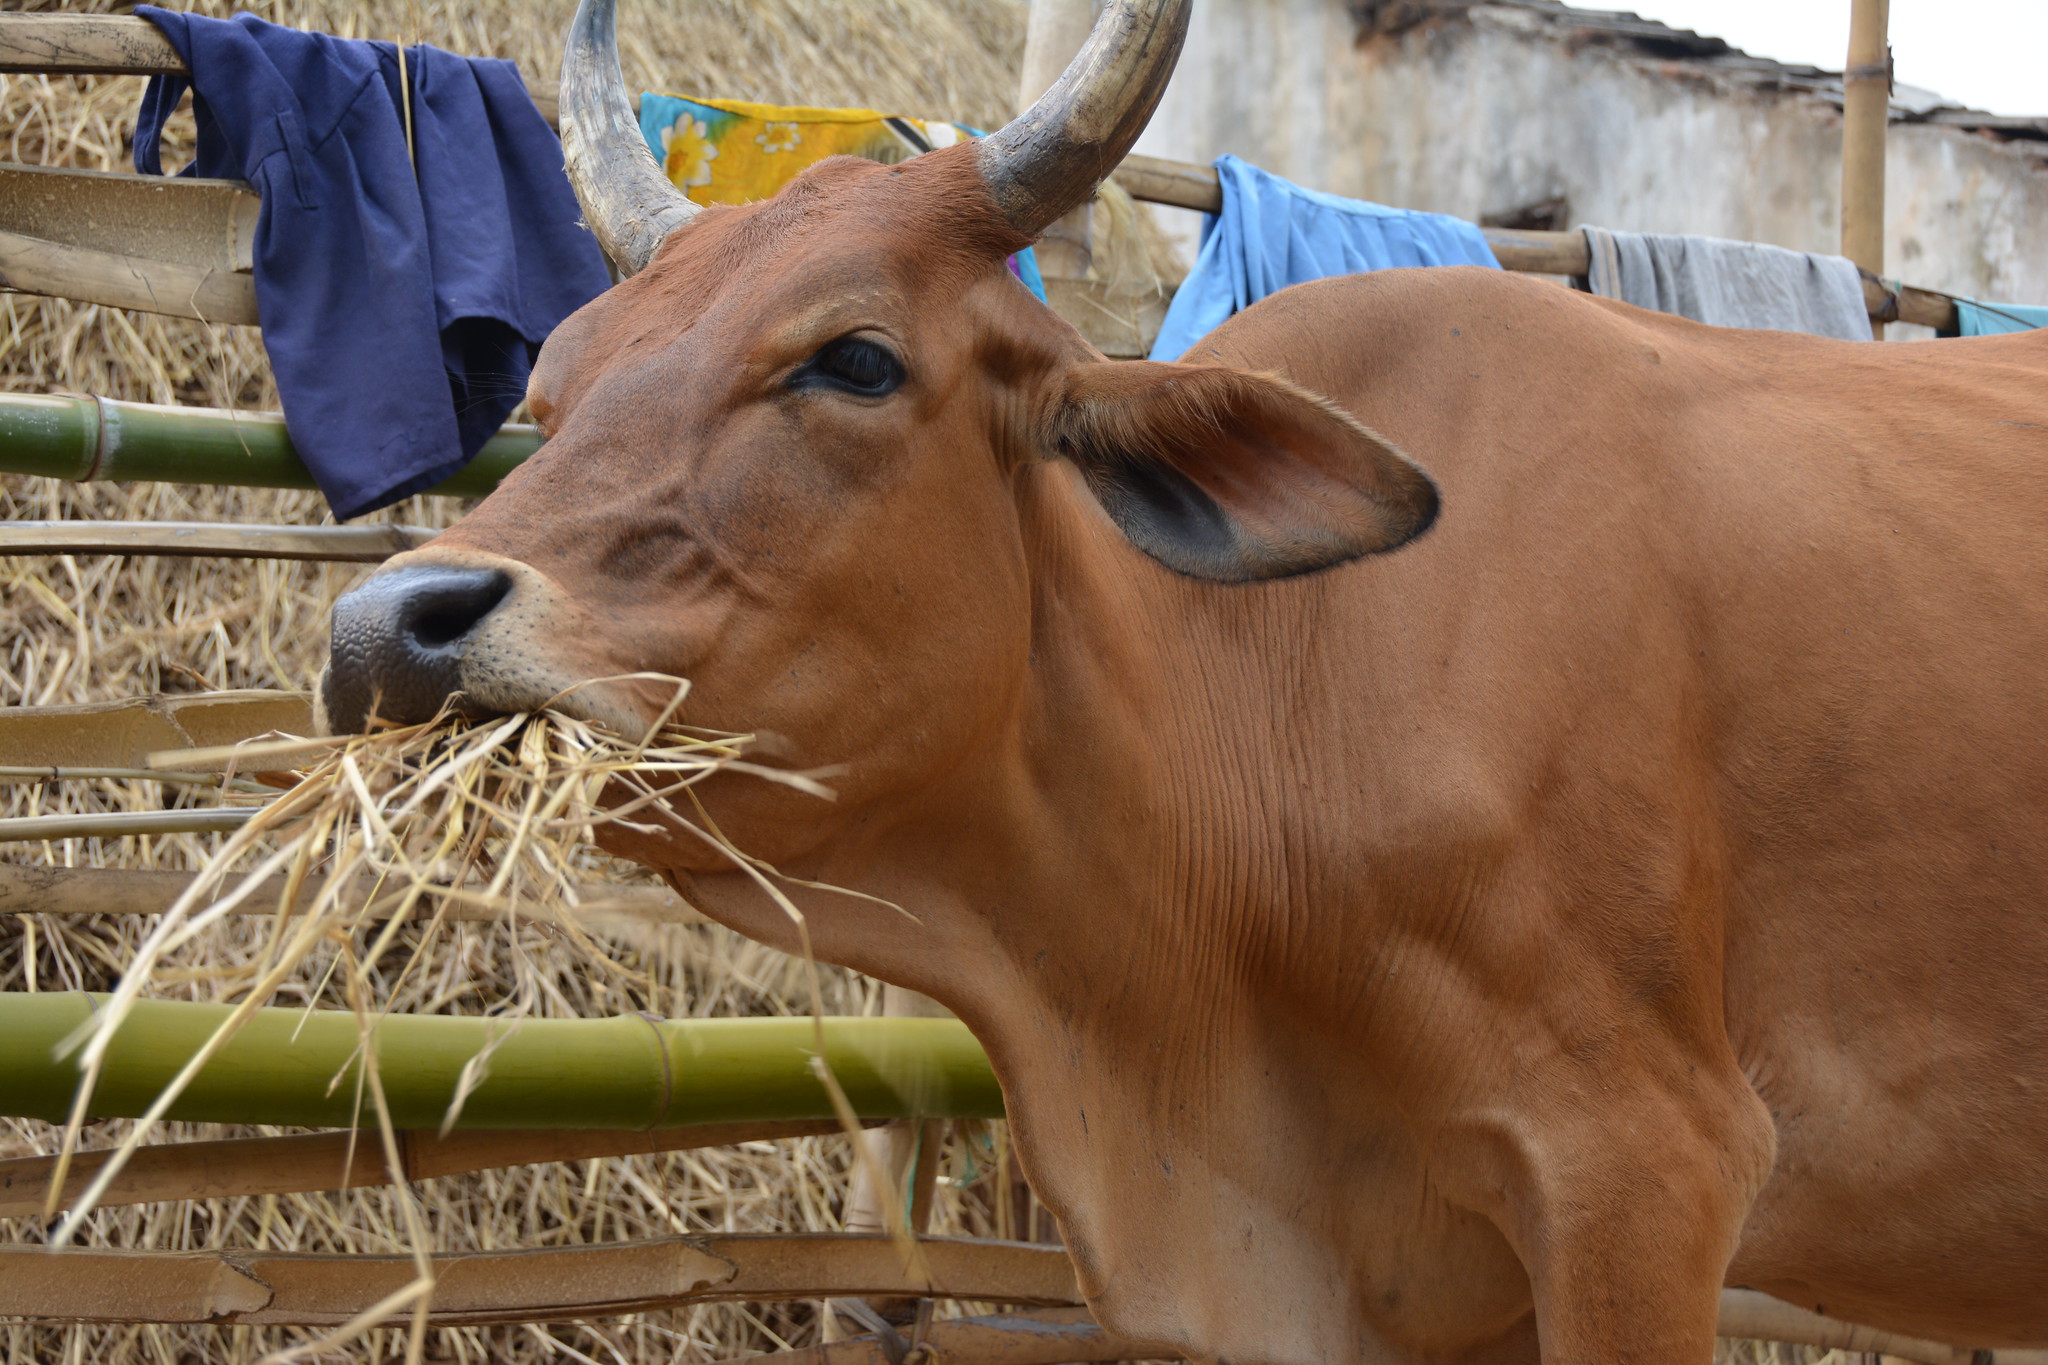 What do livestock eat in Tanzania, India and Vietnam? Explore crowd-sourced data